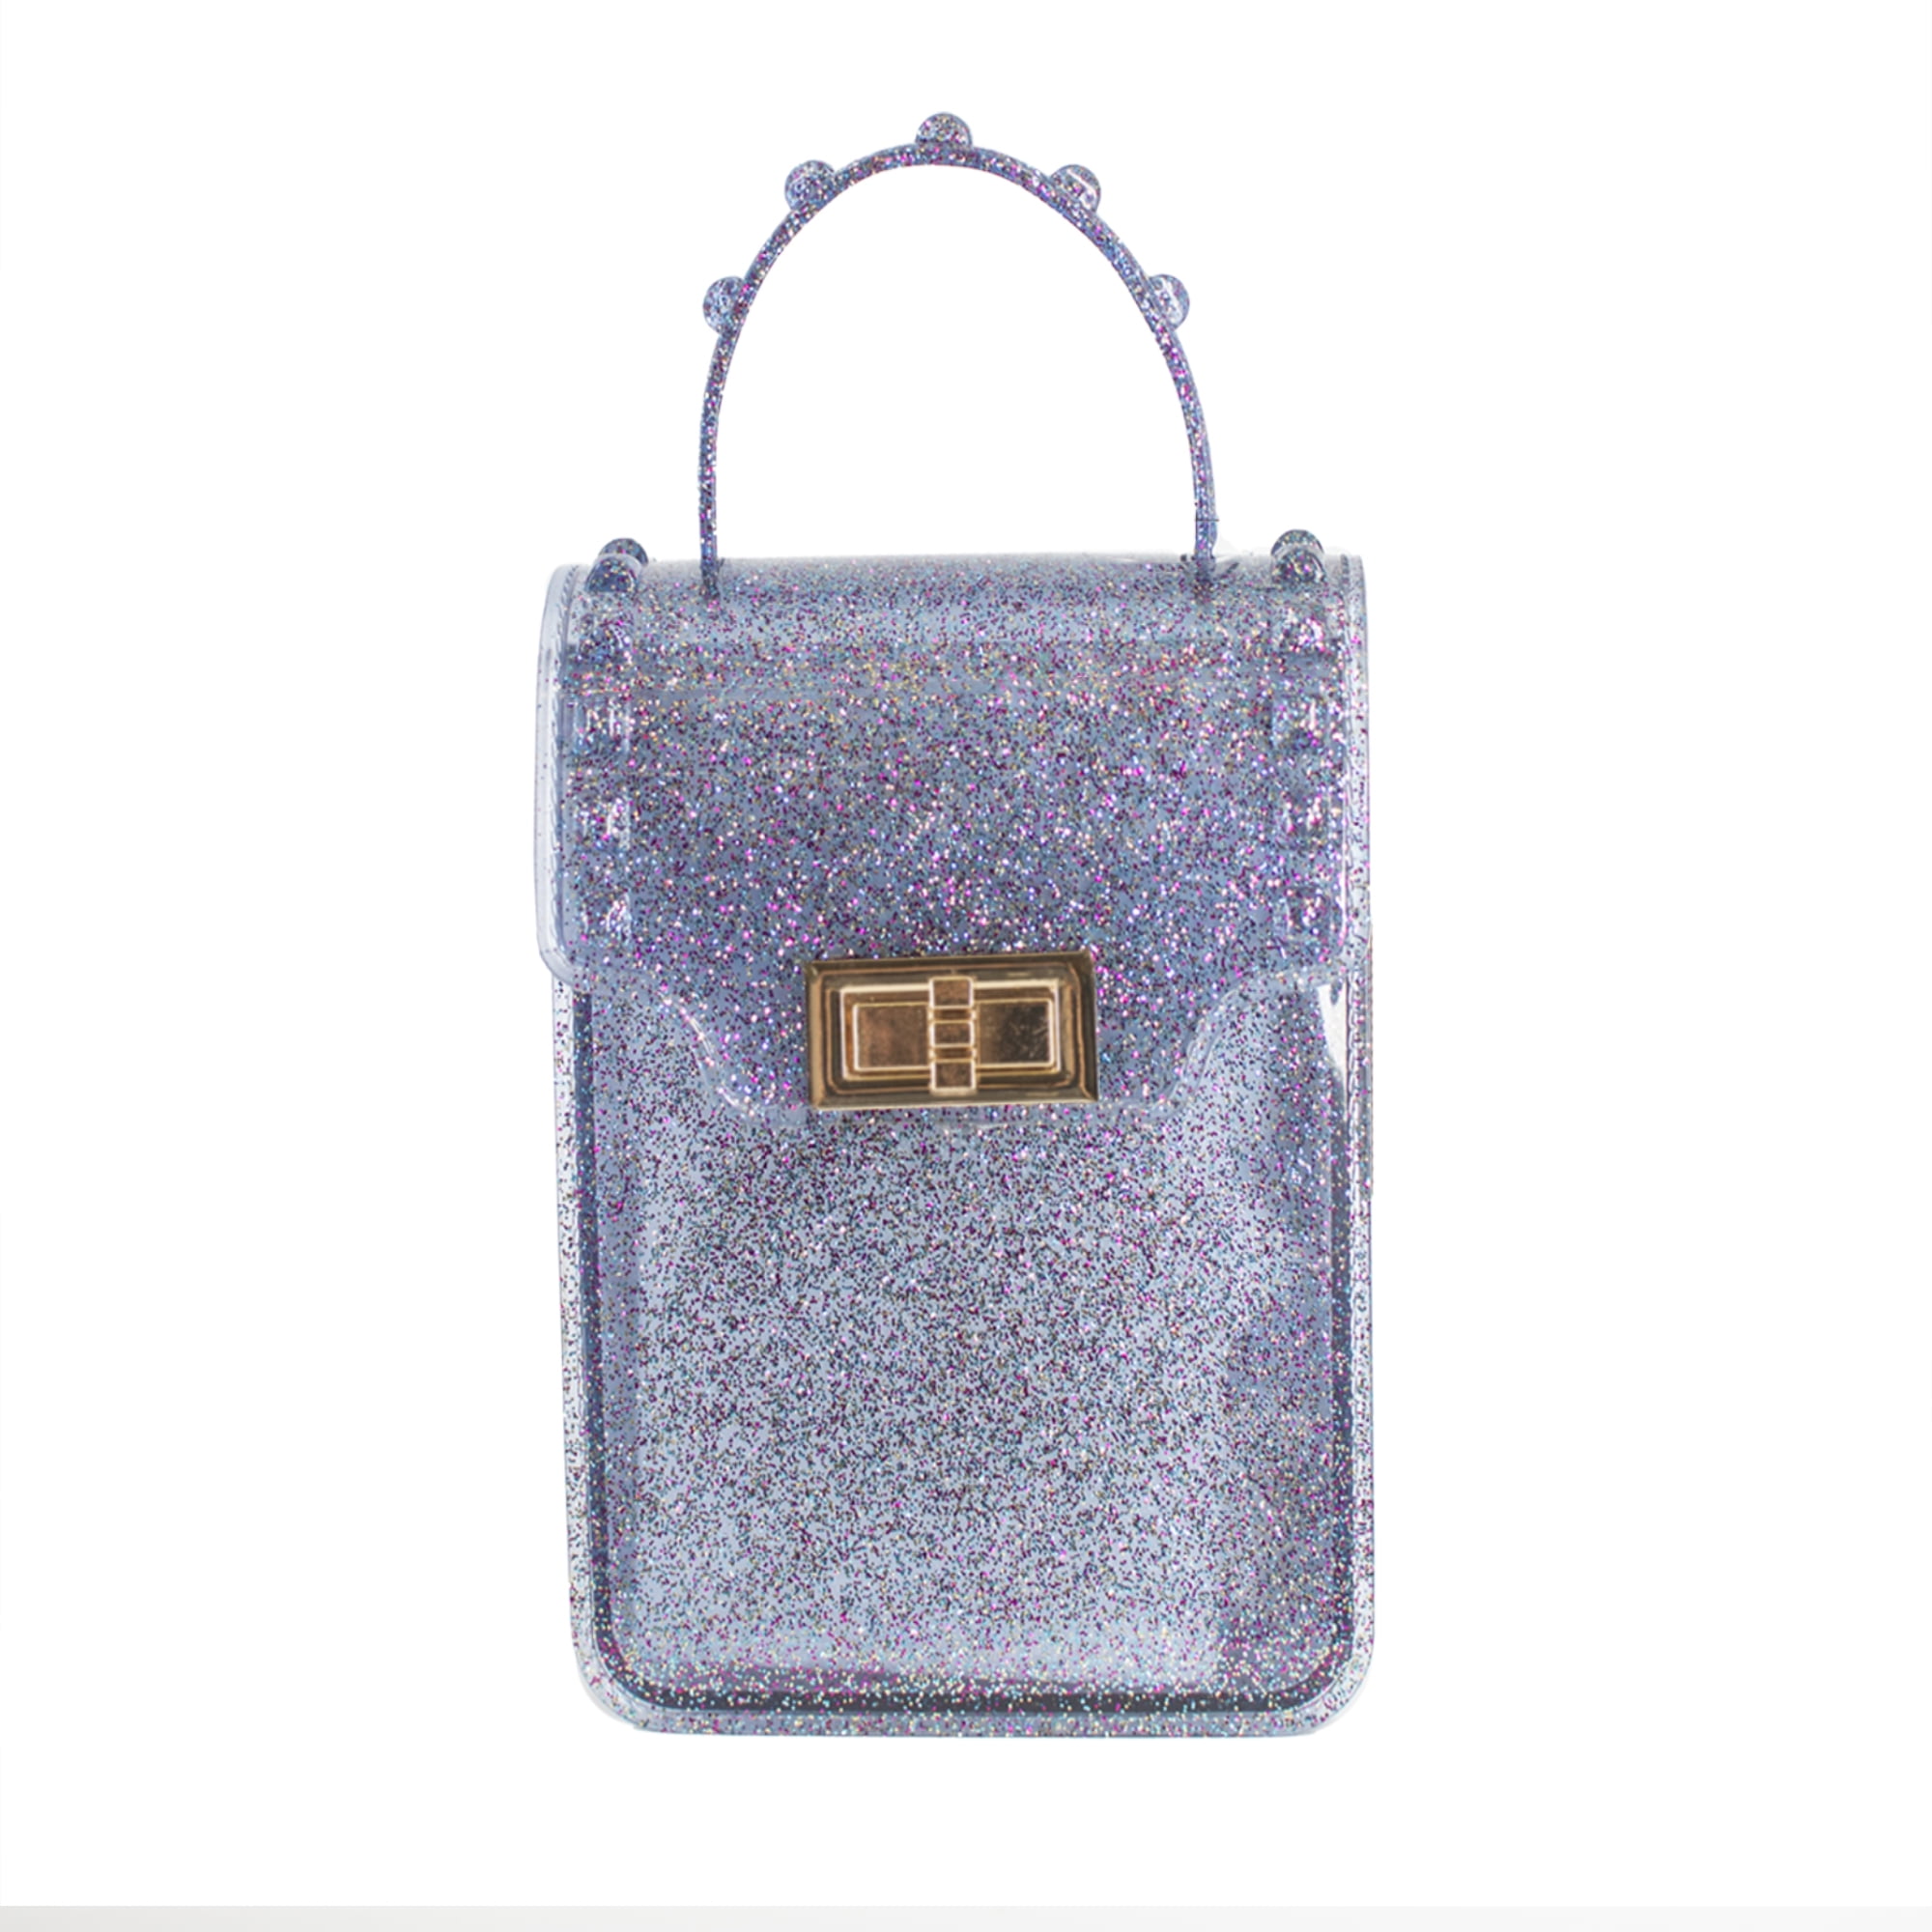 Olivia and Kate Women's Small Rose Glitter Jelly Purse Crossbody Everyday  Shoulder Bag 